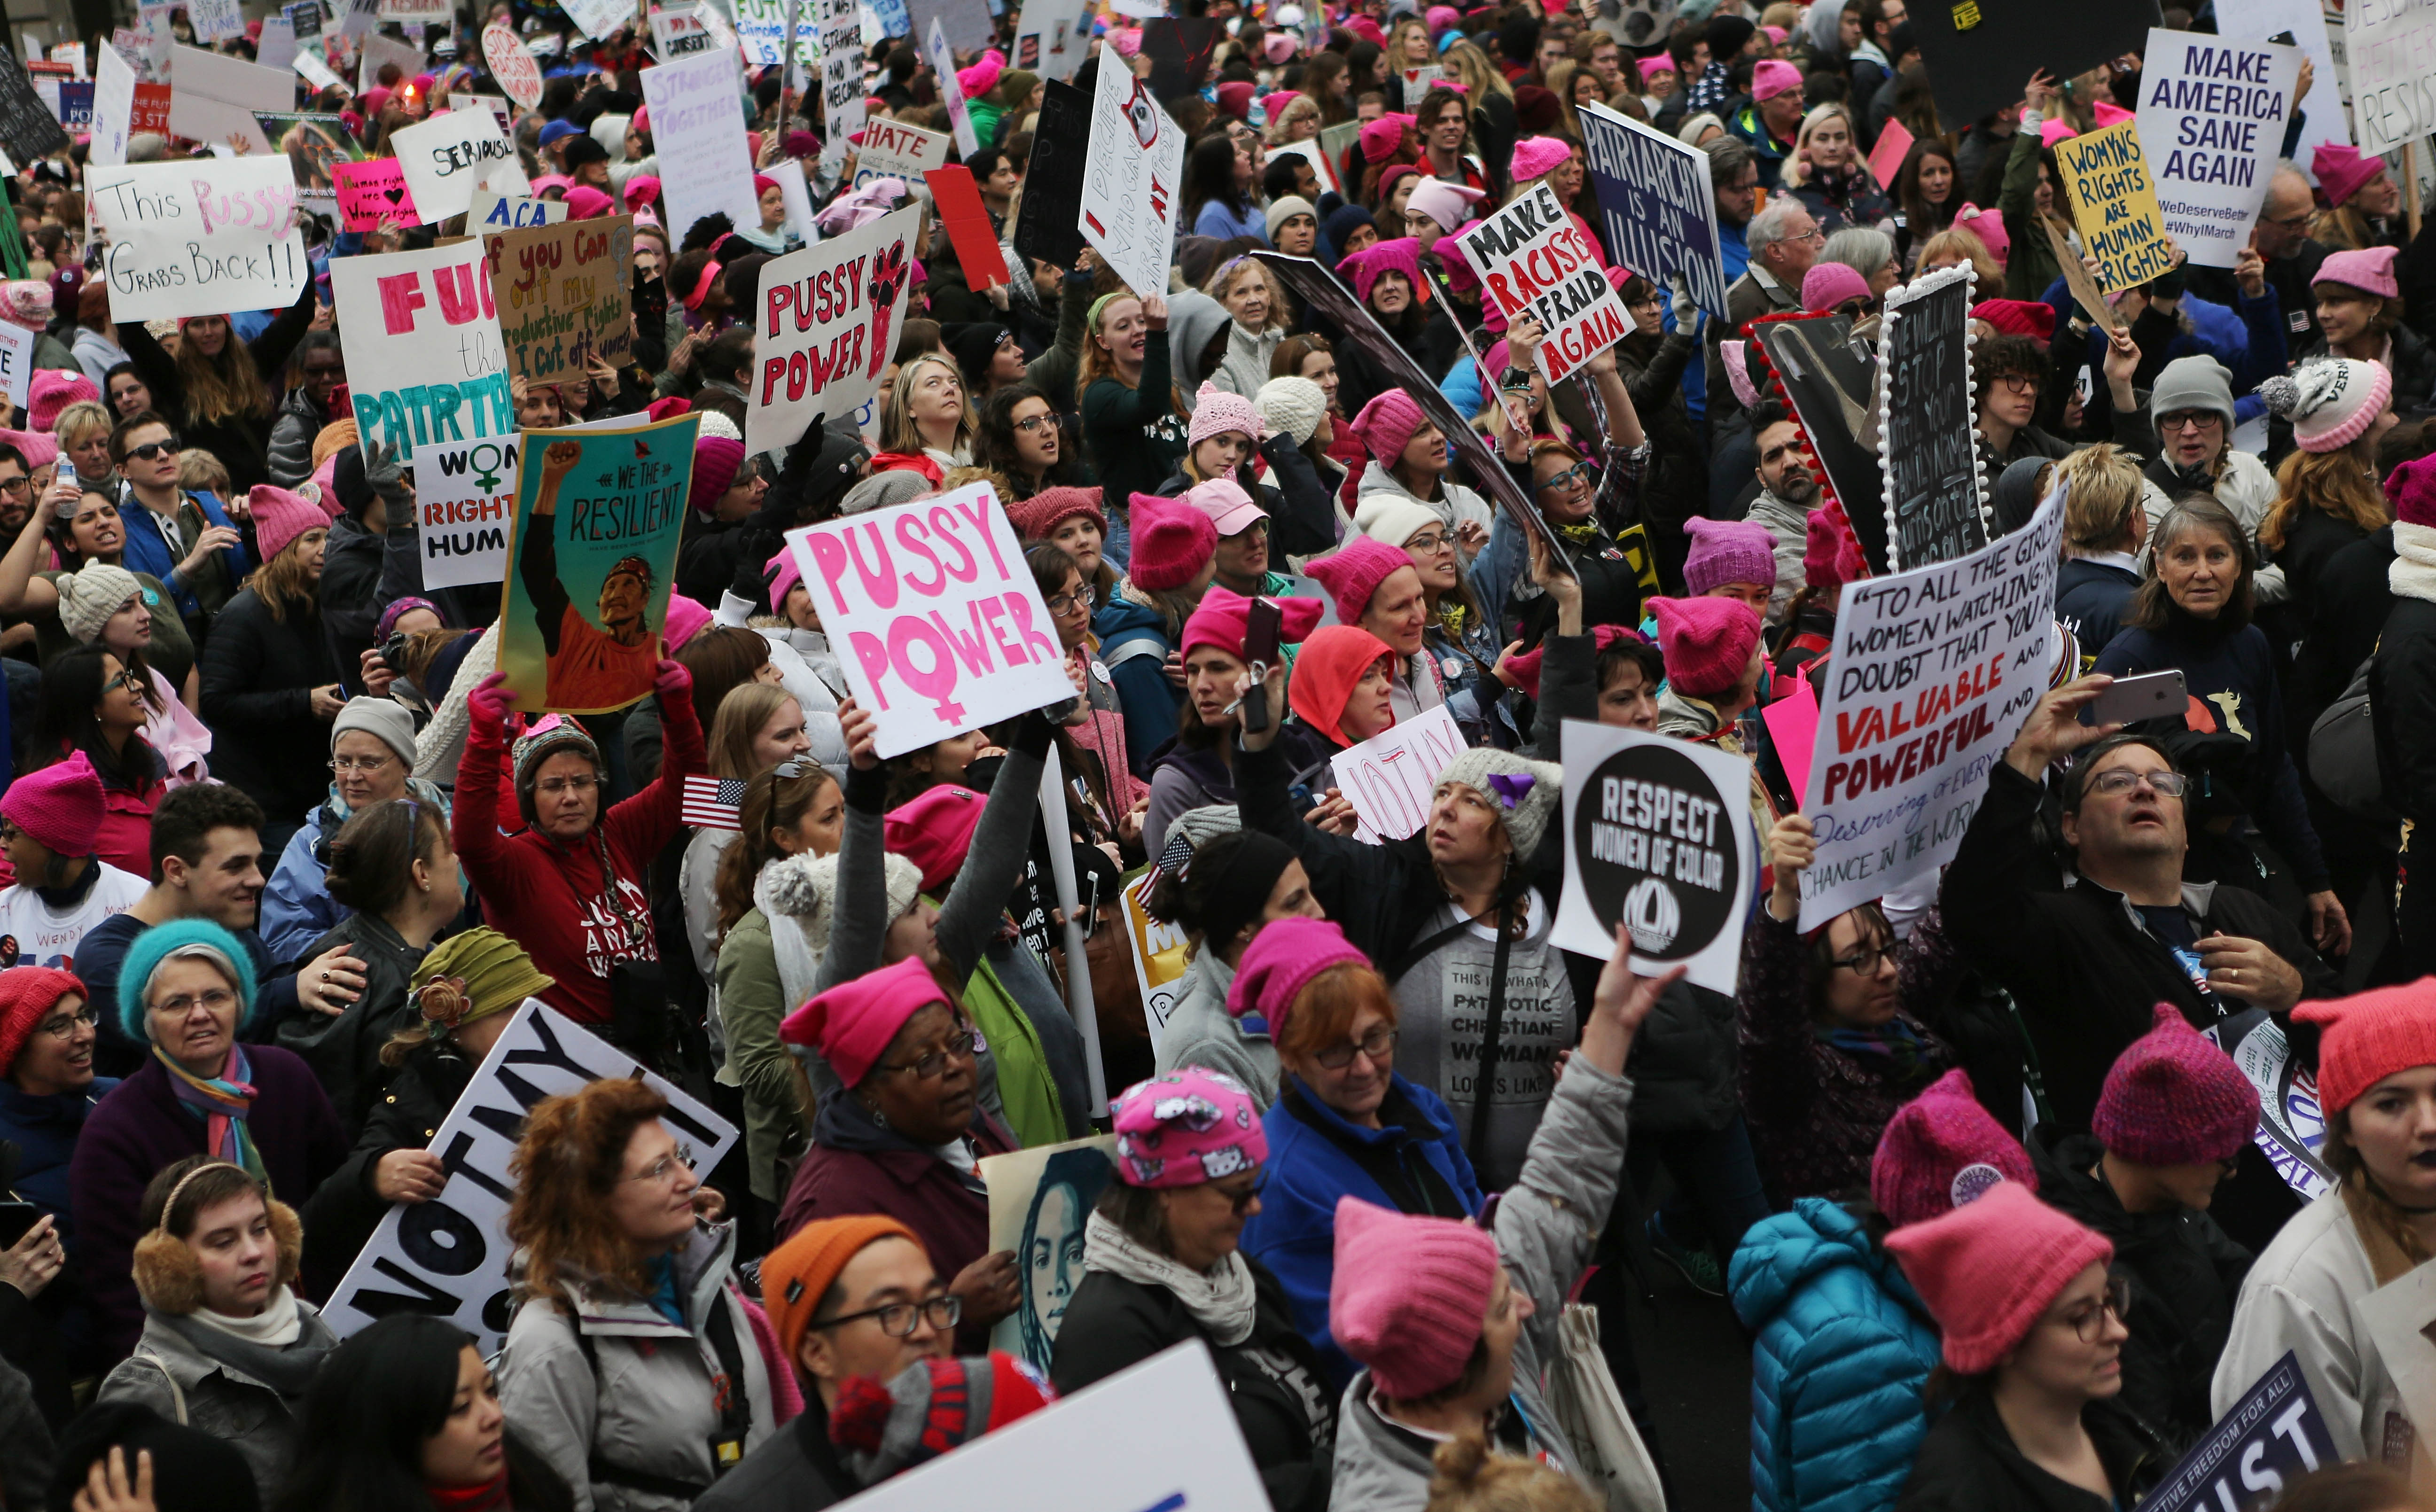 WASHINGTON, DC - JANUARY 21: Protesters march during the Women's March on Washington on January 21, 2017 in Washington, DC. Large crowds are attending the anti-Trump rally a day after U.S. President Donald Trump was sworn in as the 45th U.S. president. (Photo by Mario Tama/Getty Images)